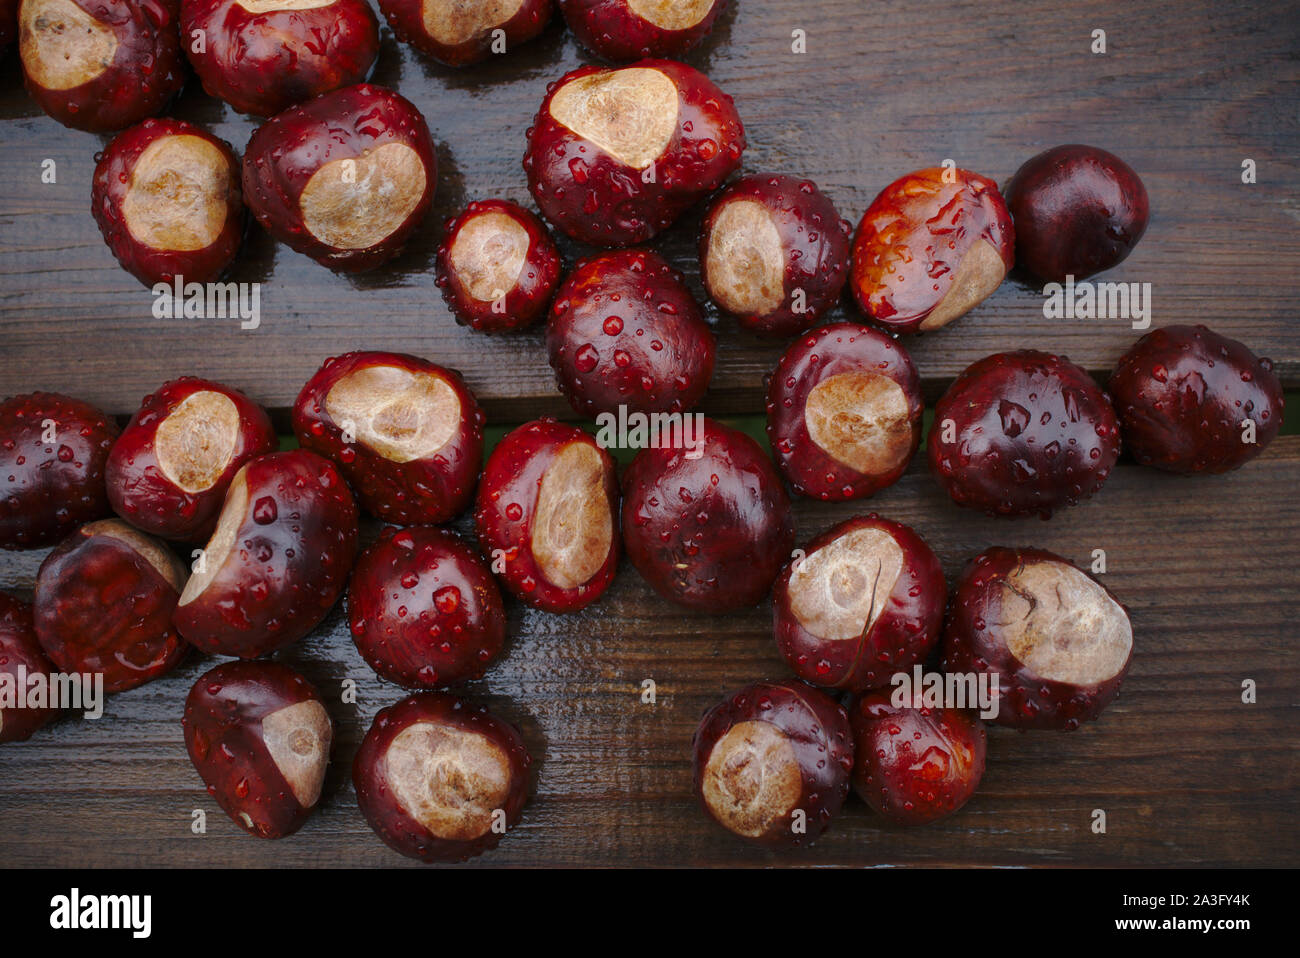 Horse chestnut Aesculus hippocastanum fruits on table. Stock Photo